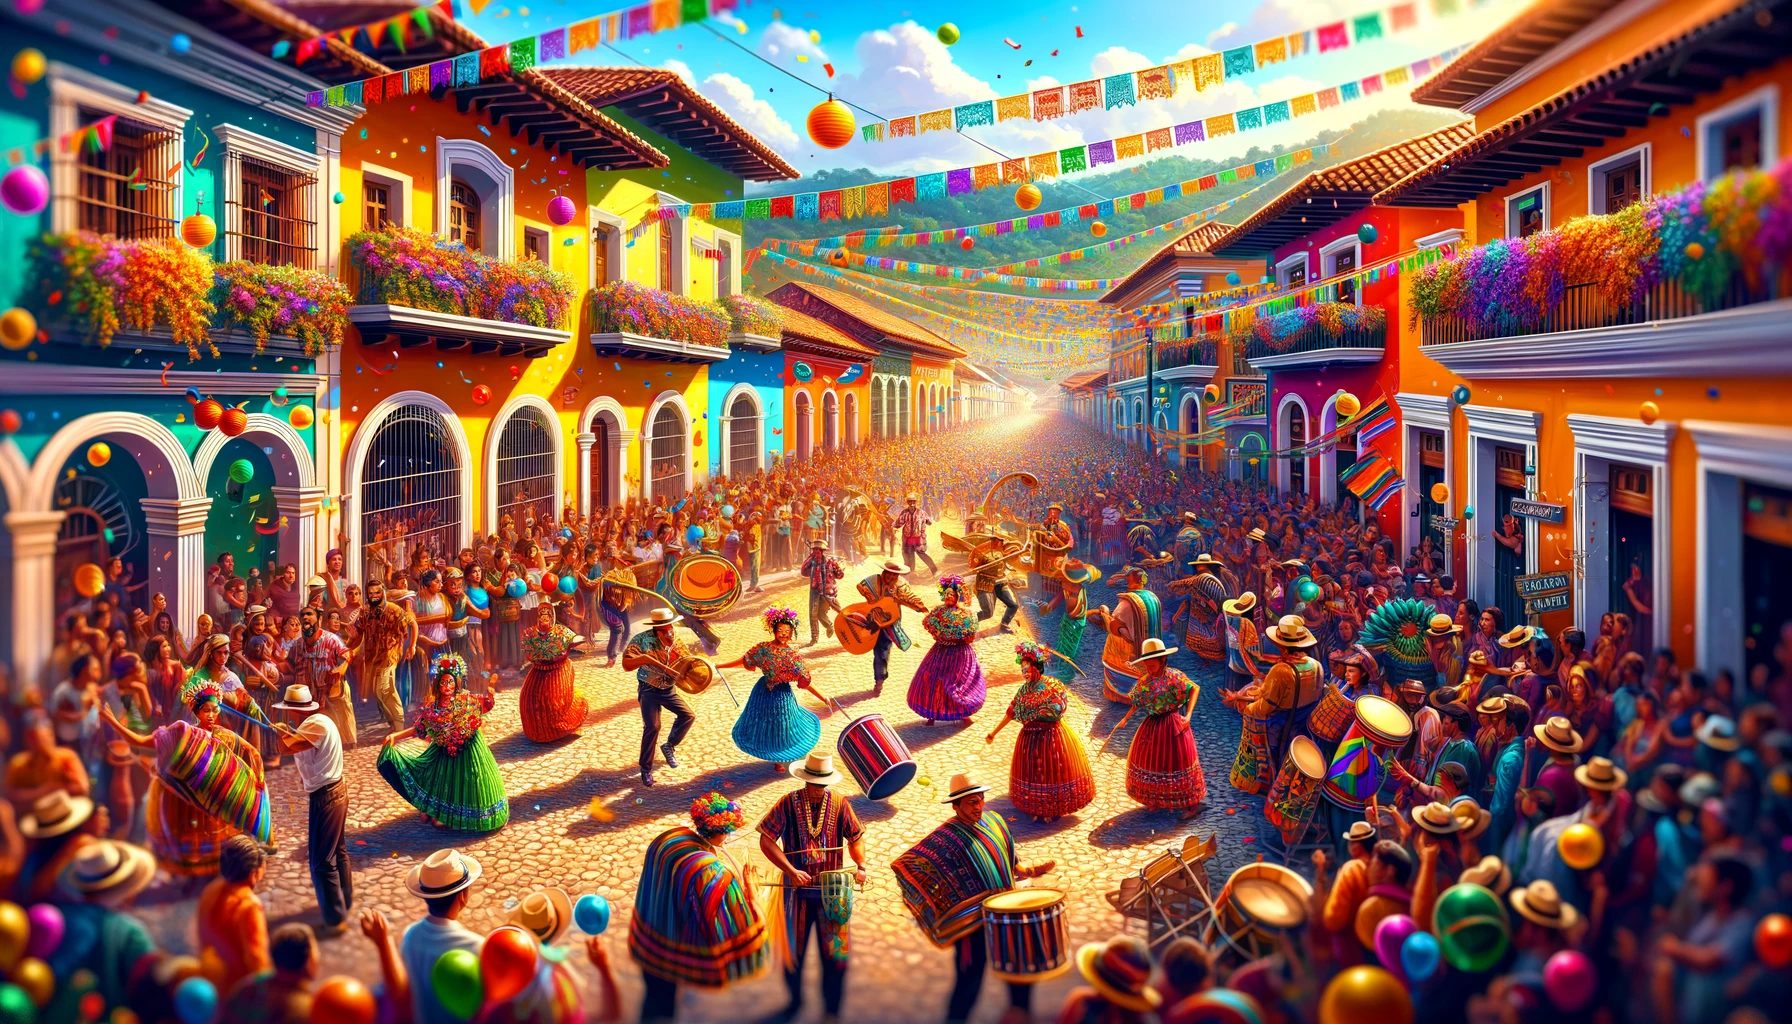 Colorful street festival with traditional music and dance.